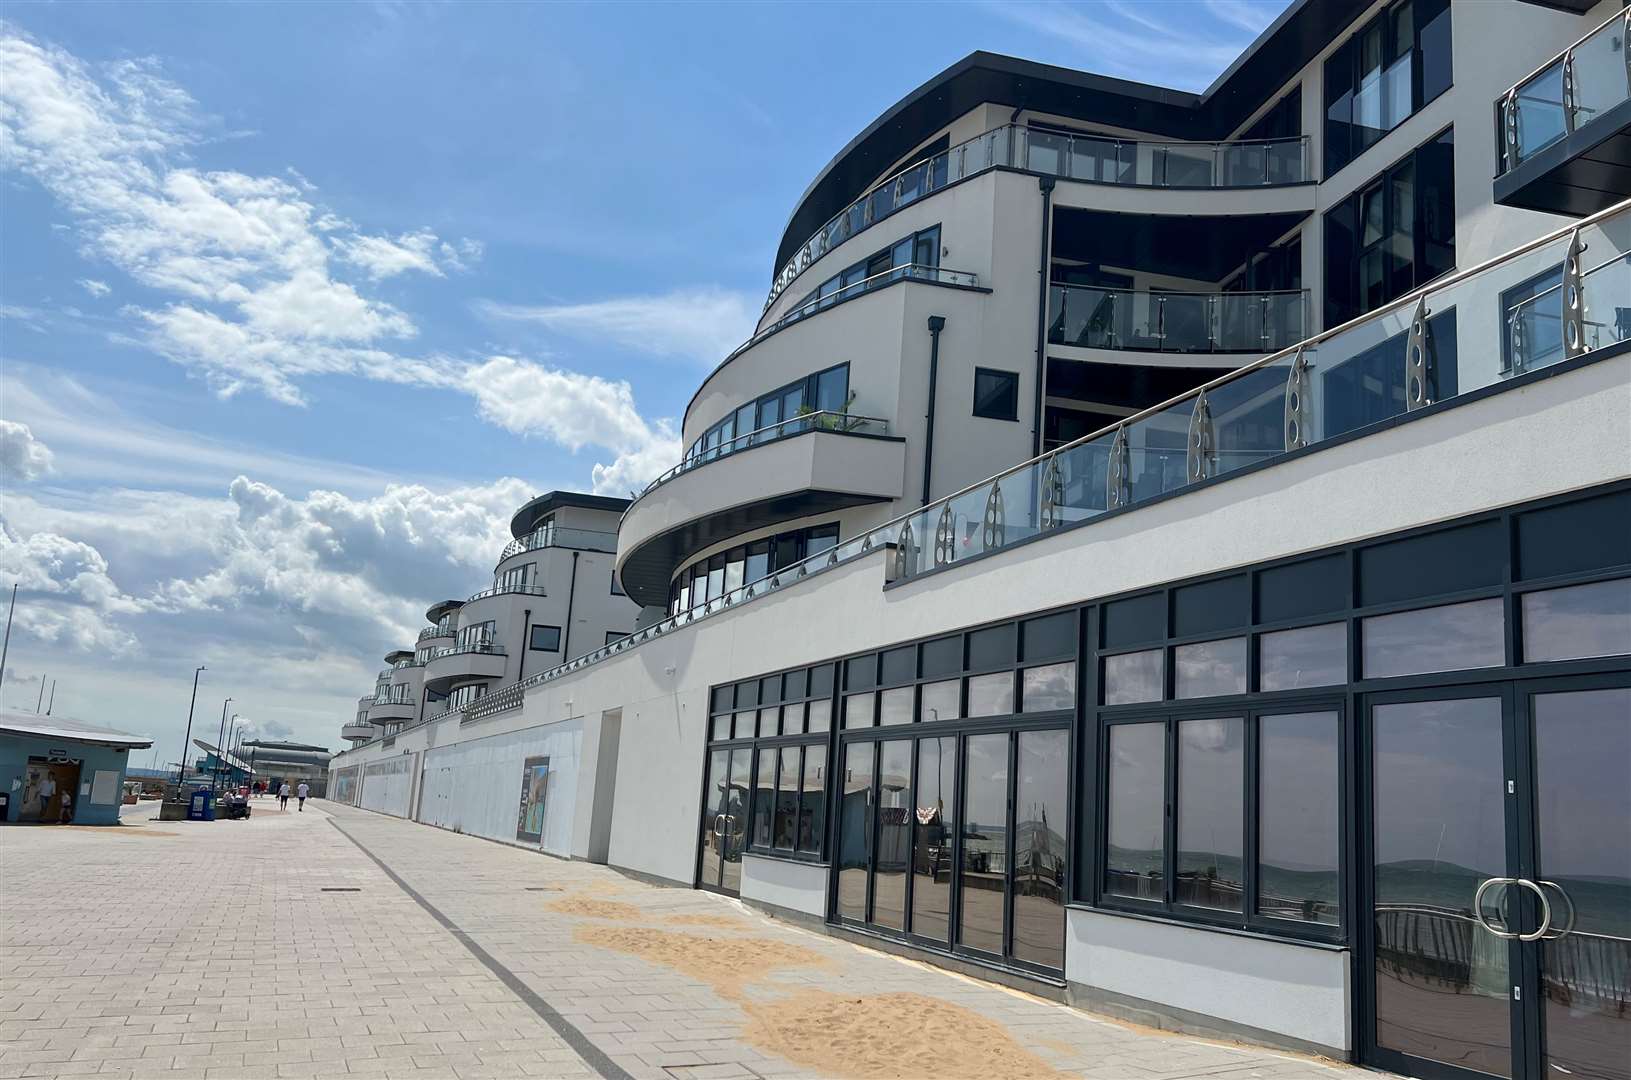 The Royal Sands development will eventually have a string of shops, restaurants and cafes sat below the swanky apartments